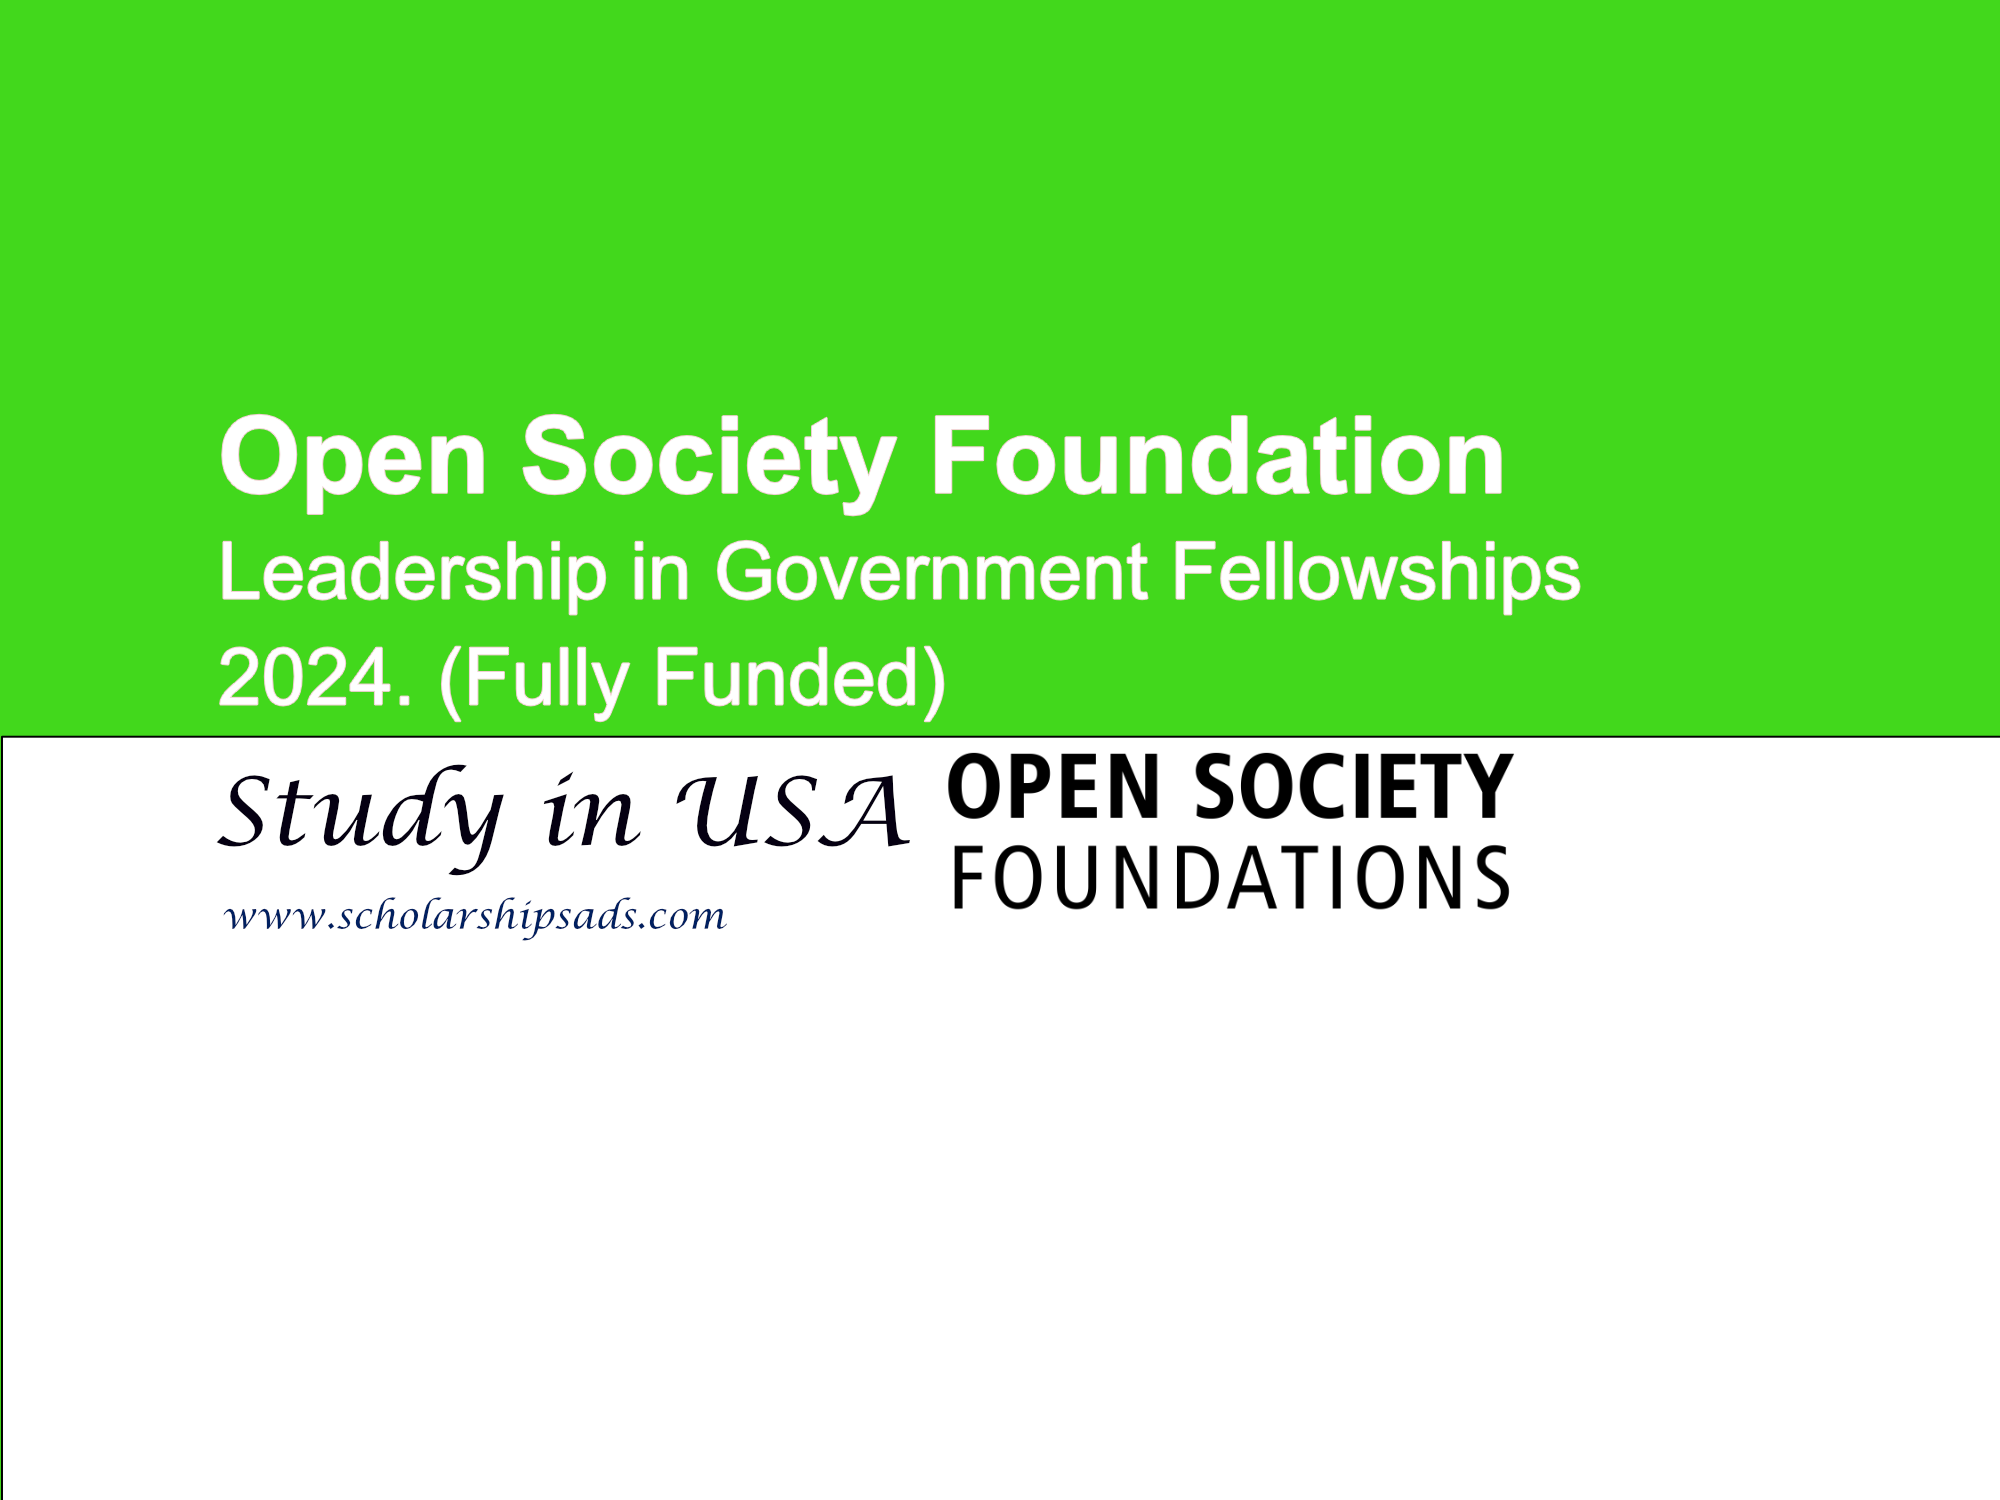 Opportunity at Open Society: Leadership in Government Fellowships 2024. (Fully Funded)